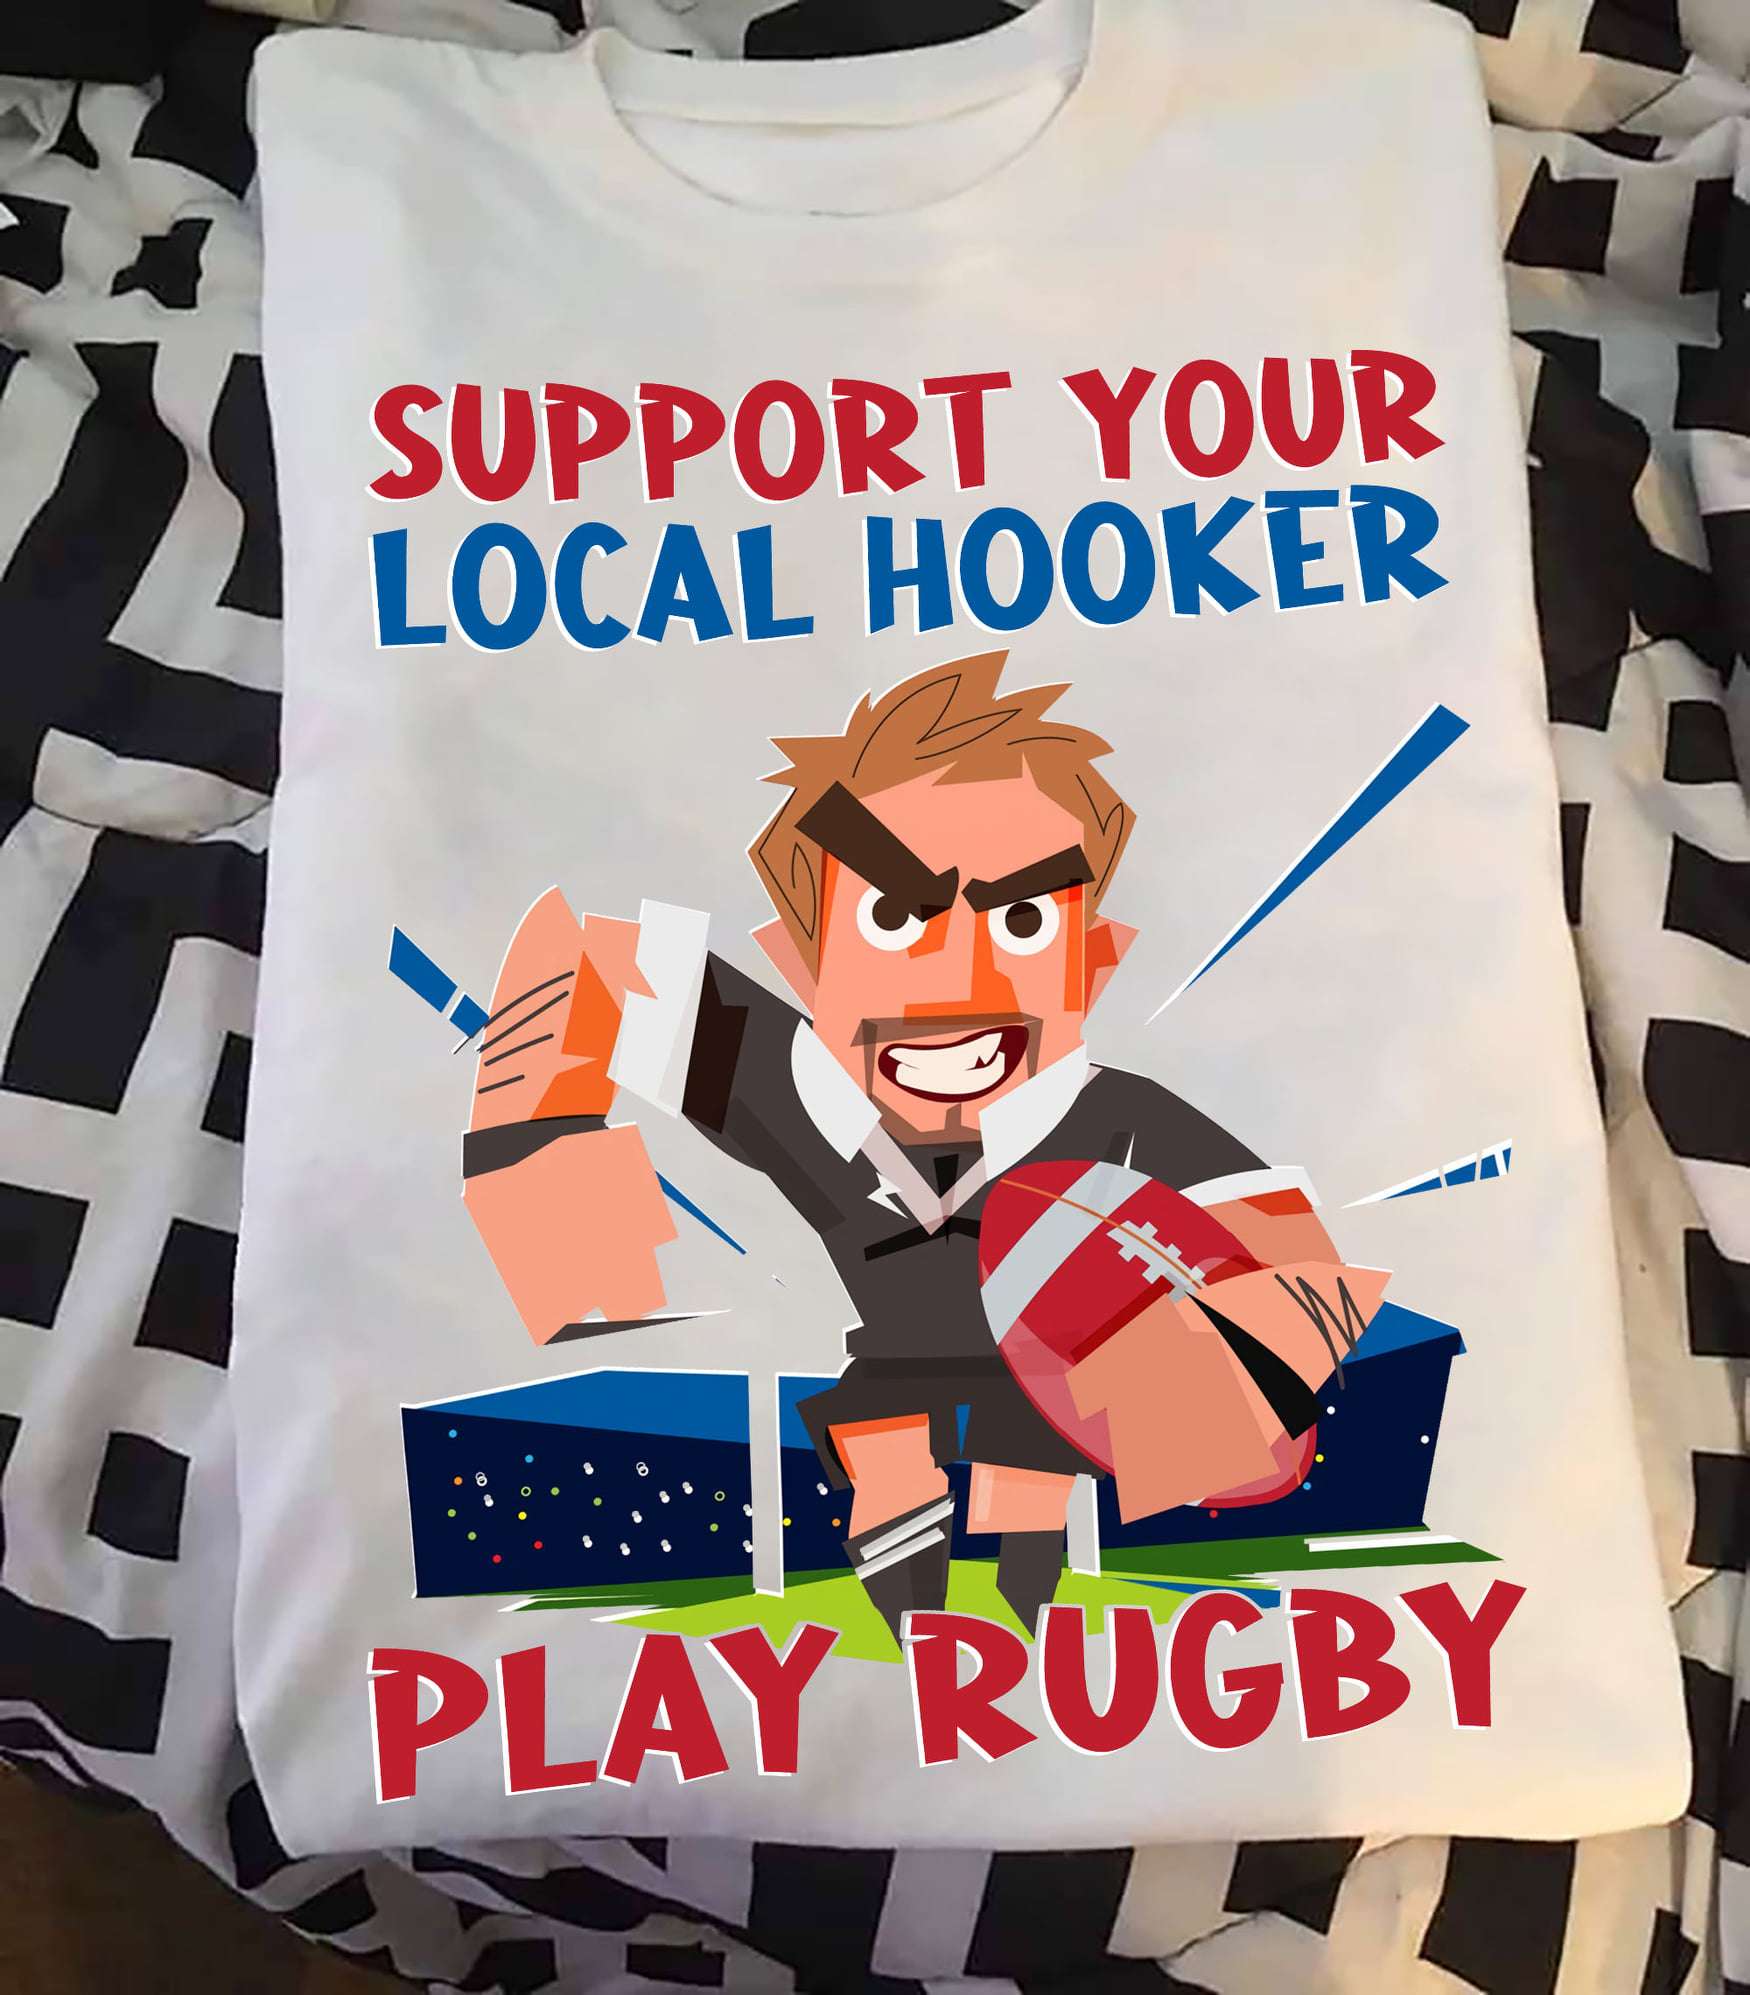 Support your local hooker, play rugby - Rugy player gift